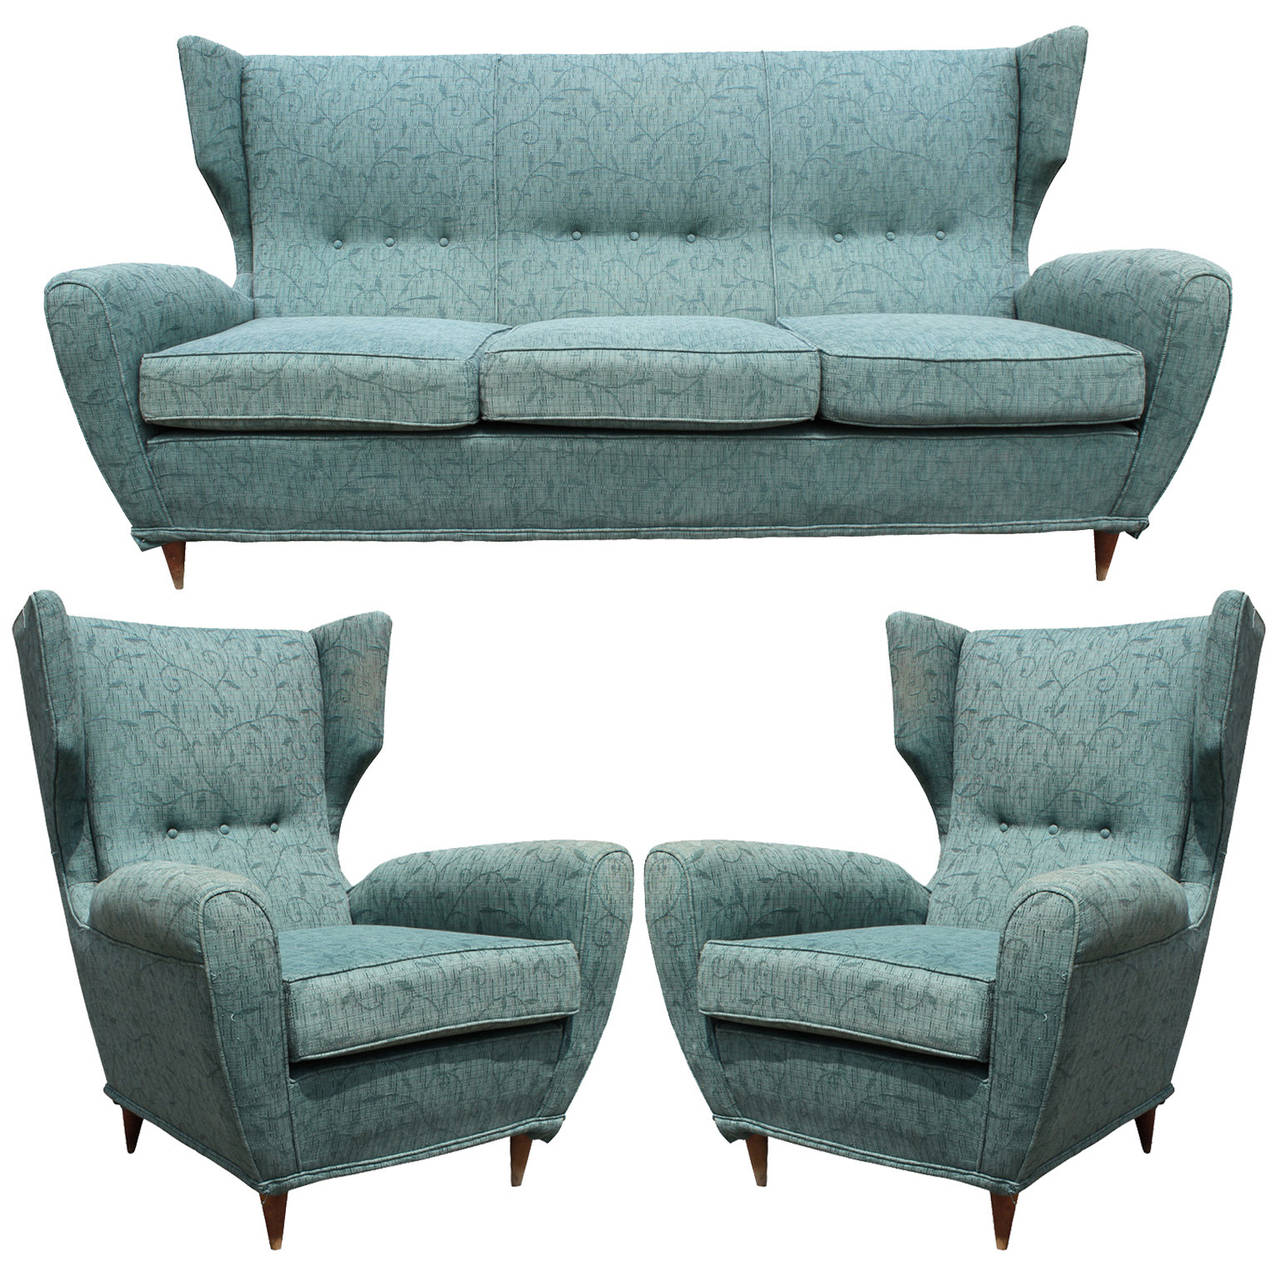 Sculptural Mid Century Modern Italian Wingback Sofa with Tapered Legs 2